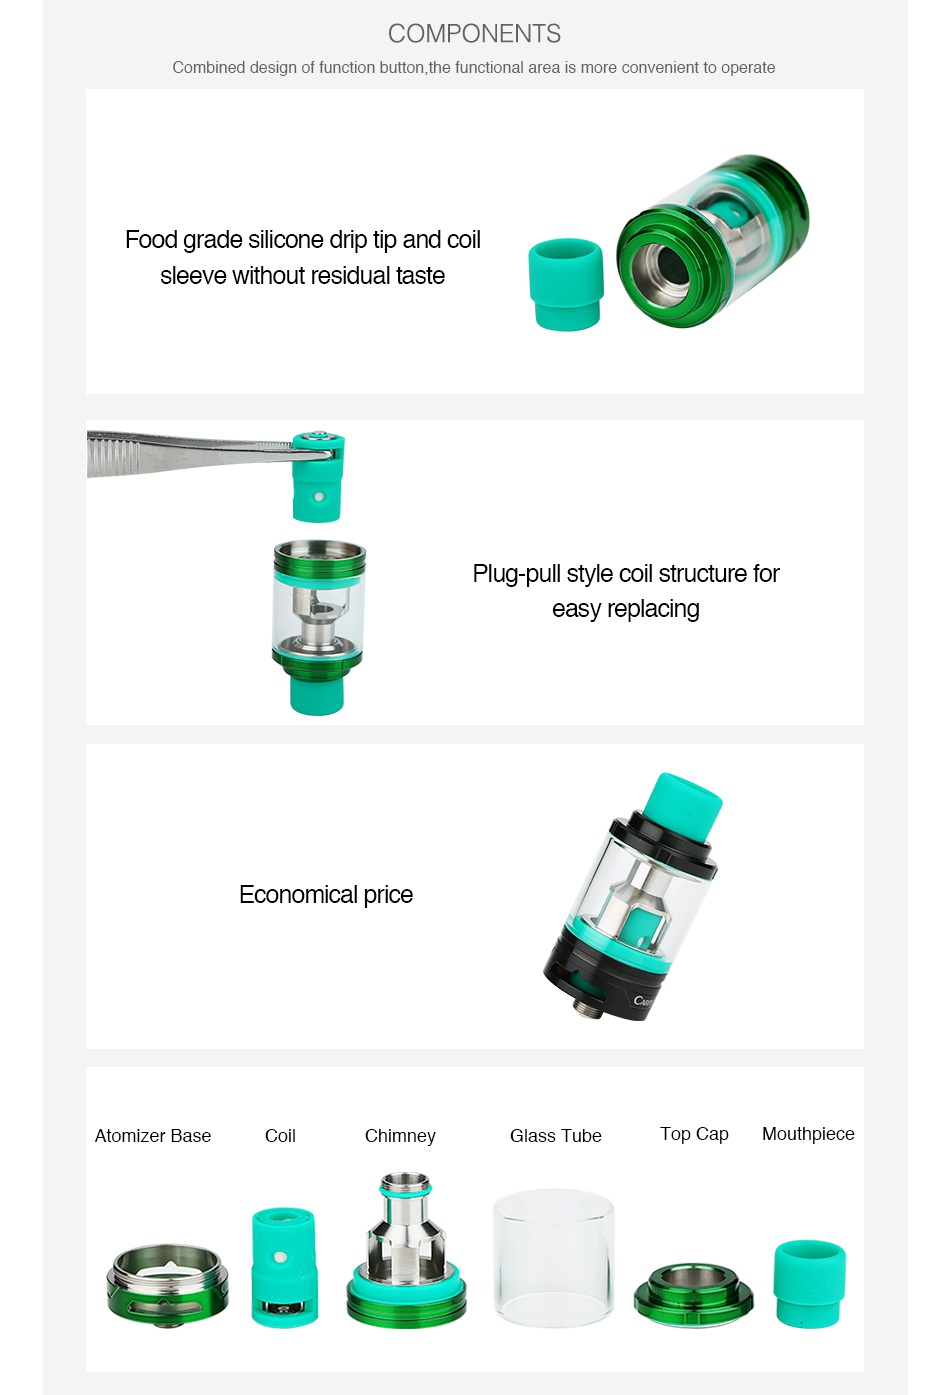 CARRYS Green Subohm Tank 4ml COMPONENTS Combined design of function button  the functional area is more convenient to operate ood grade silicone drip tip and coil sleeve without residual taste Plug pull style coil structure for easy replacing Economical price Atomizer base Chimney Glass Tube op Cap Mouthpiece